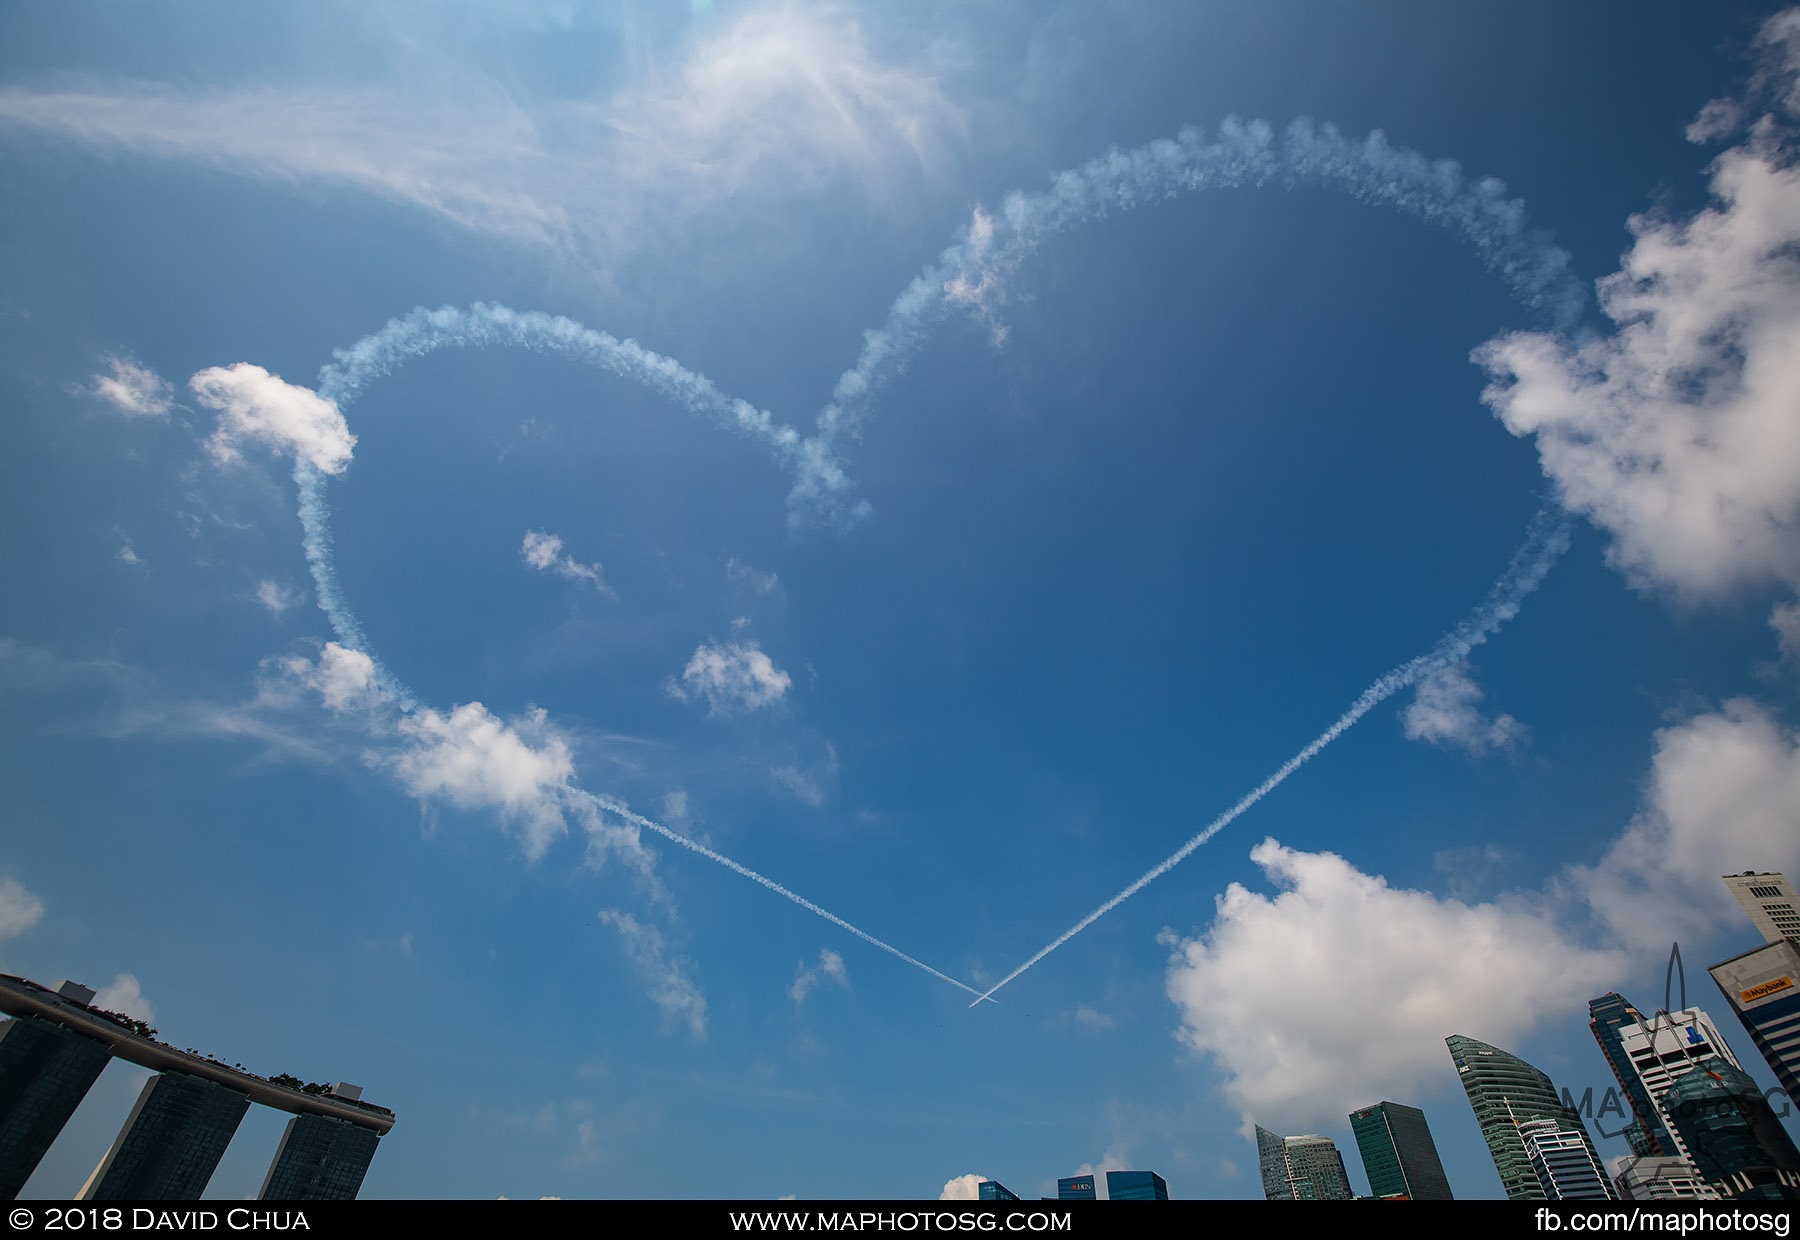 1904 – 2 F-16 Fighting Falcons paint a heart in the sky